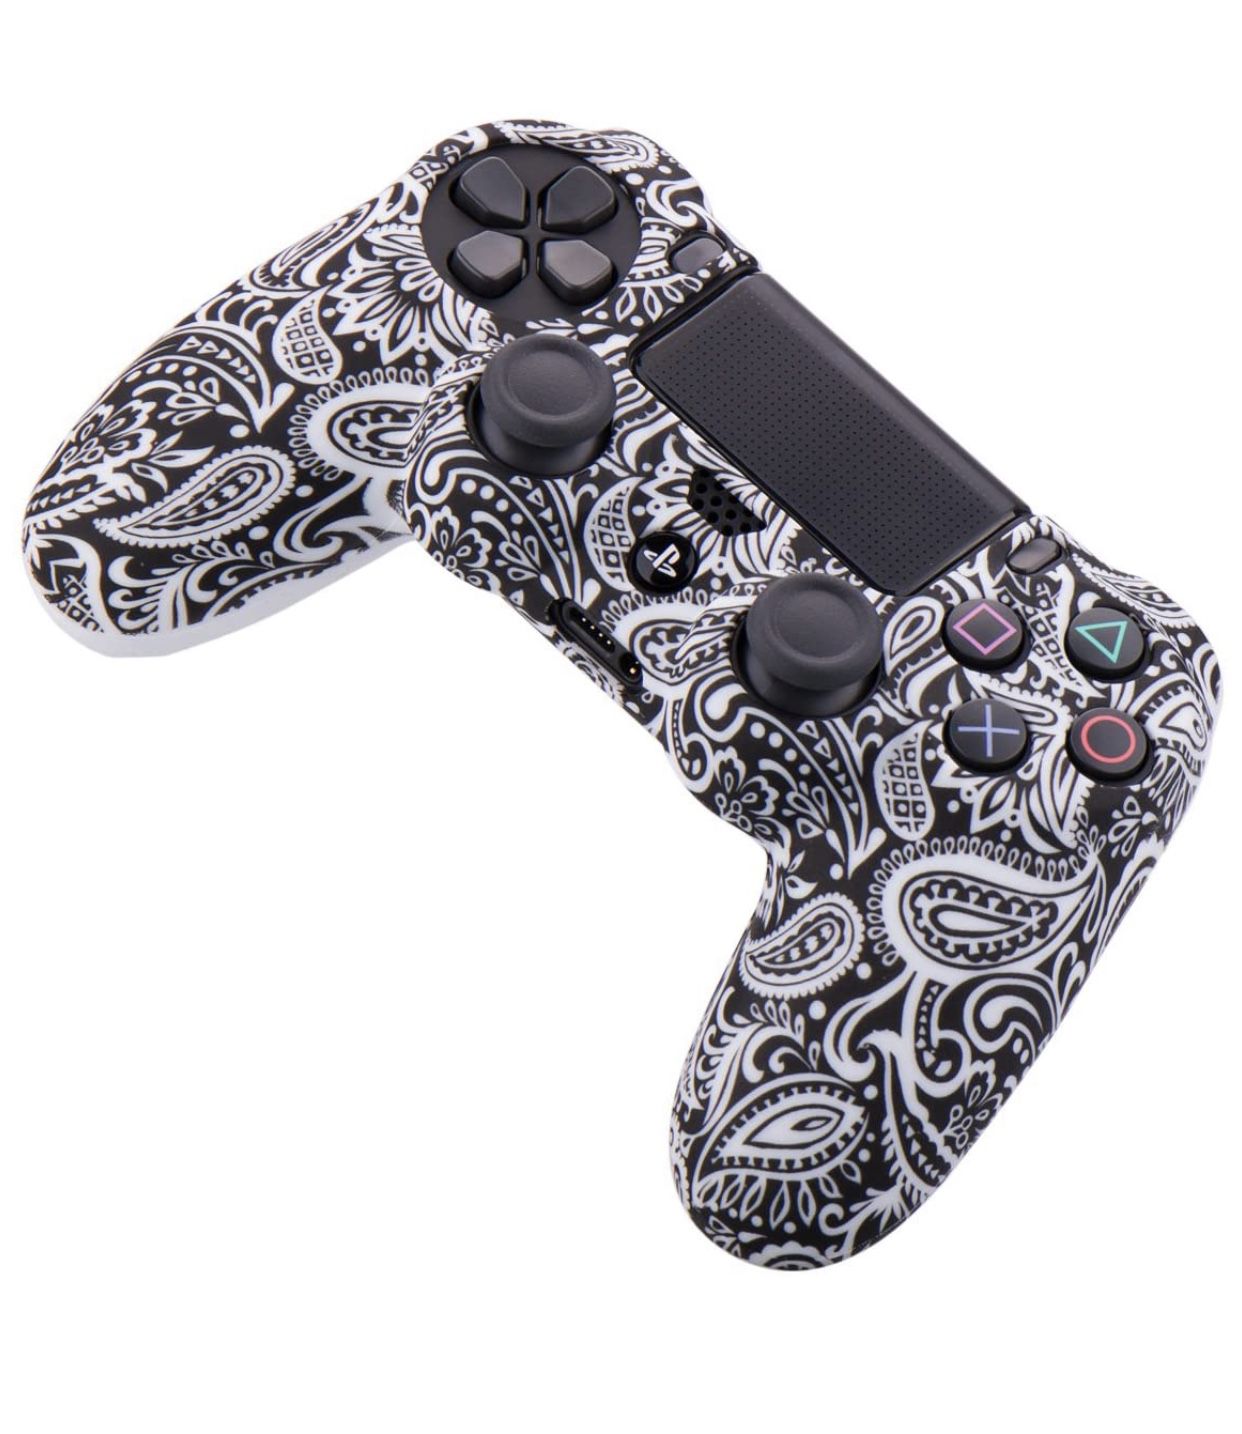 Water Transfer Printing Camouflage Silicone Cover Skin Case for Sony PS4/slim/Pro Dualshock 4 Controller x 1 (Flower)